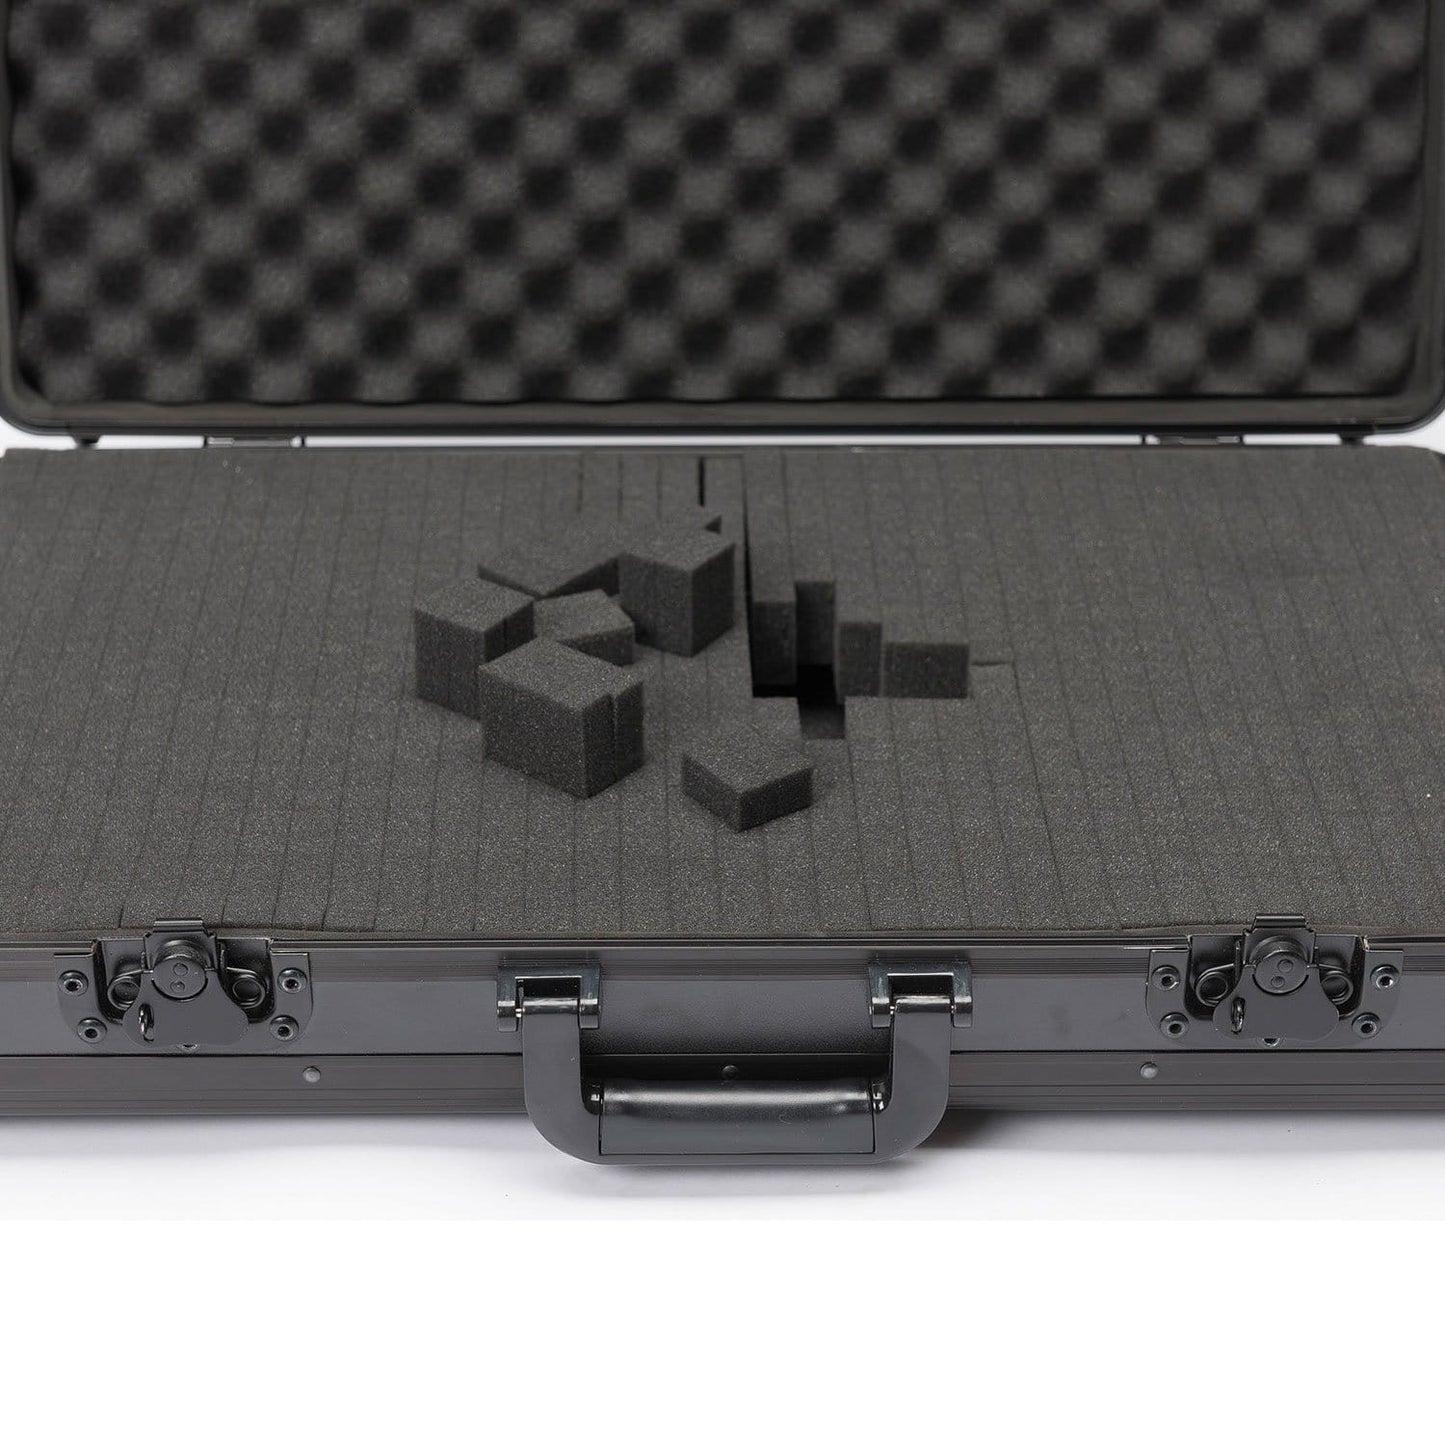 Magma MGA41102 Carry-Lite DJ Case XXL Plus - PSSL ProSound and Stage Lighting